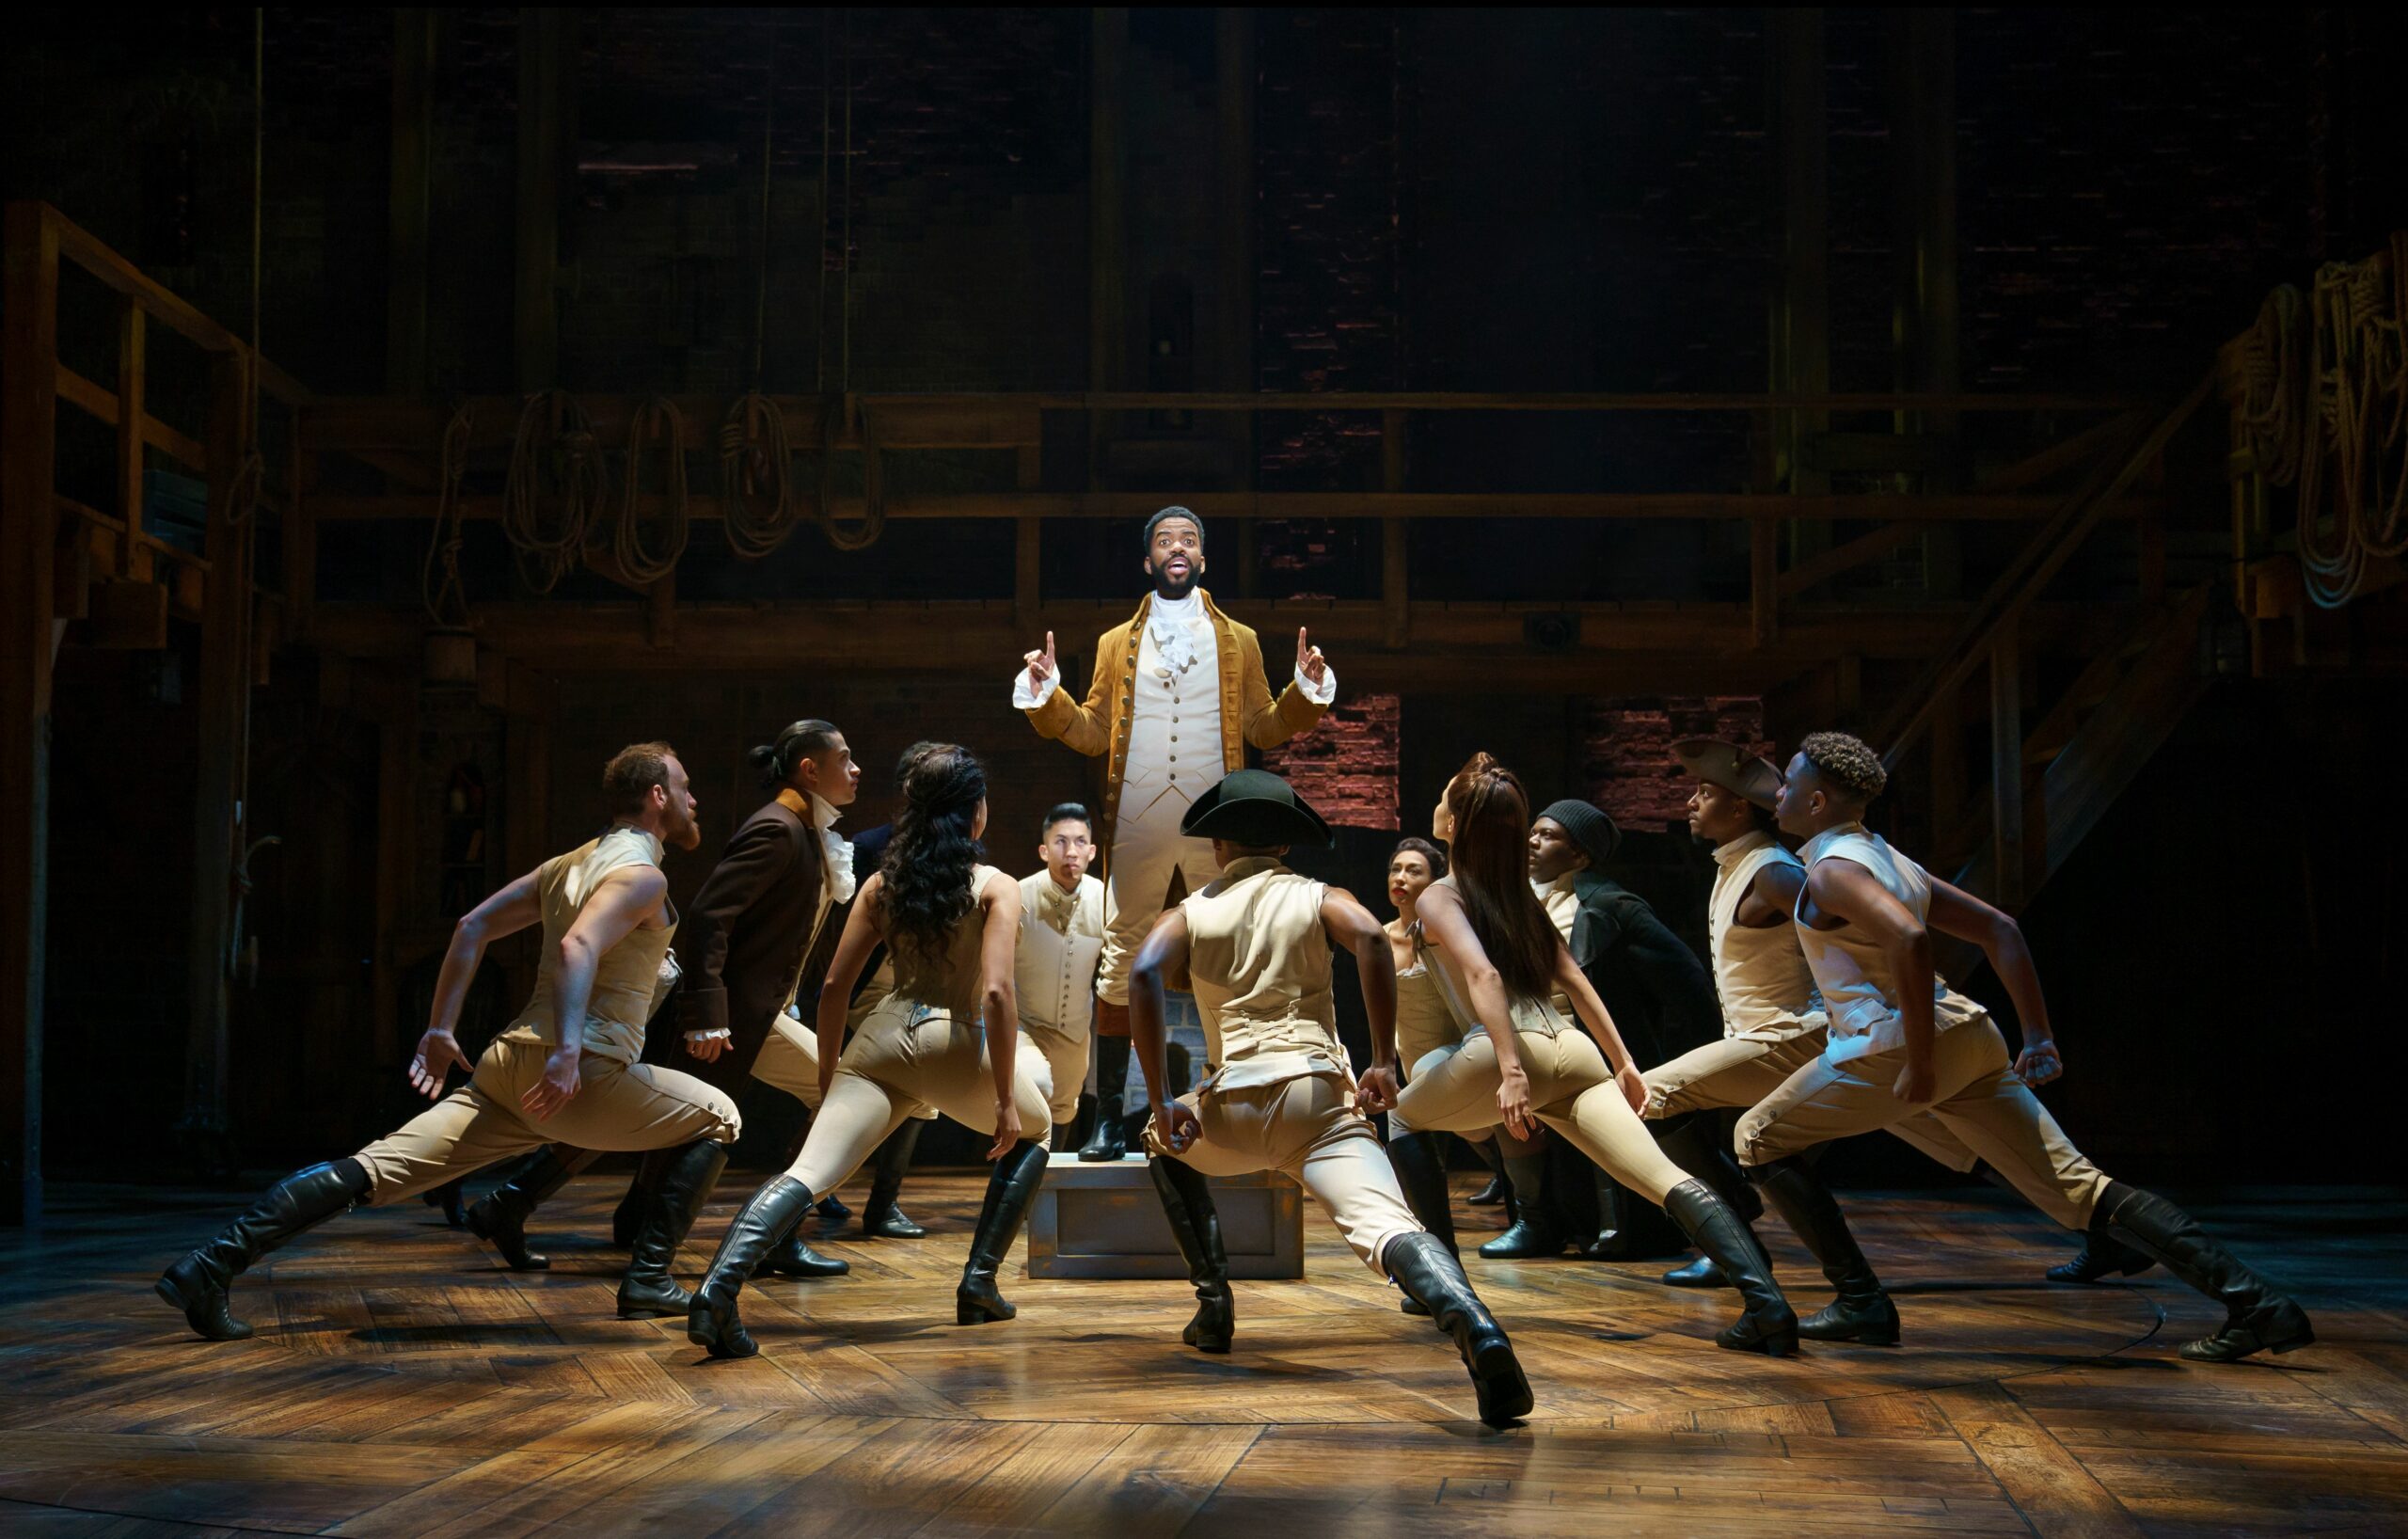 A standing Hamilton is surrounded by the ensemble who are in a lunching position towards him